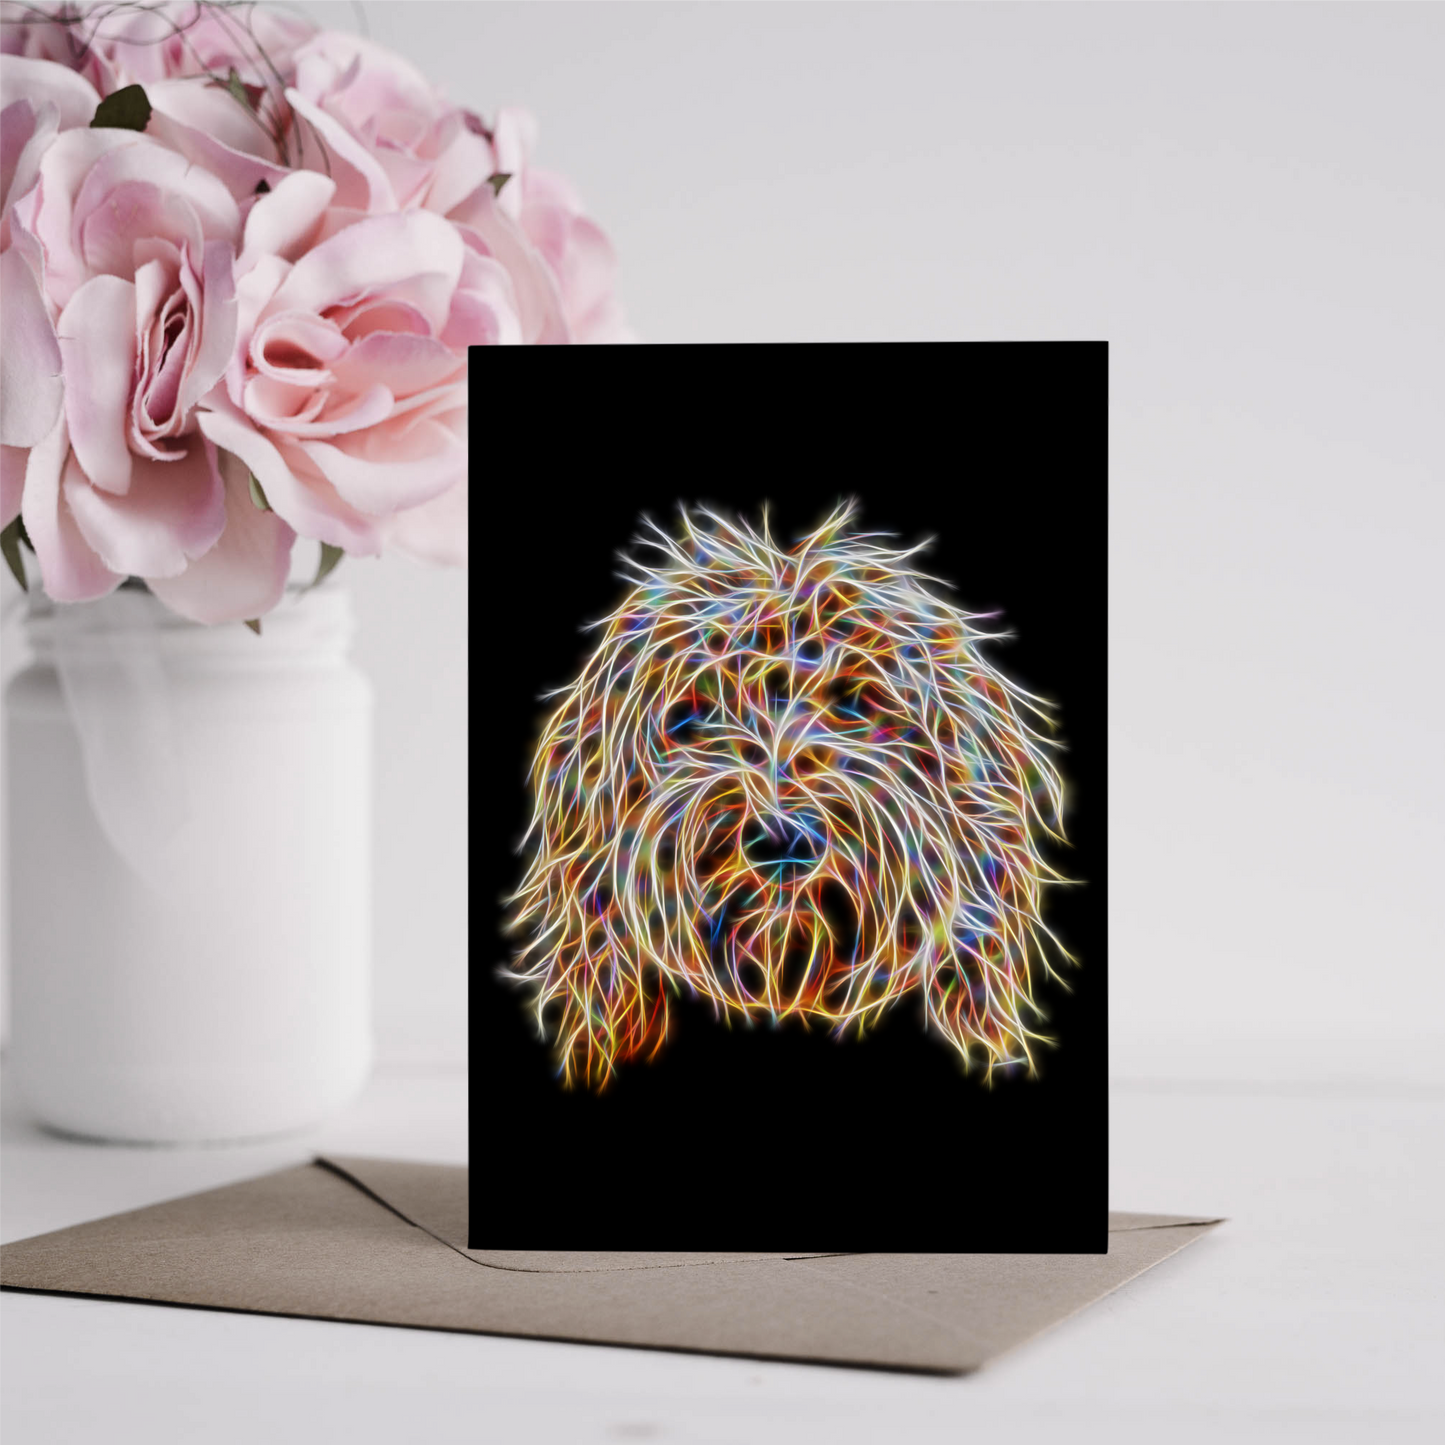 Gold Labradoodle Greeting Card Blank Inside for Birthdays or any other Occasion